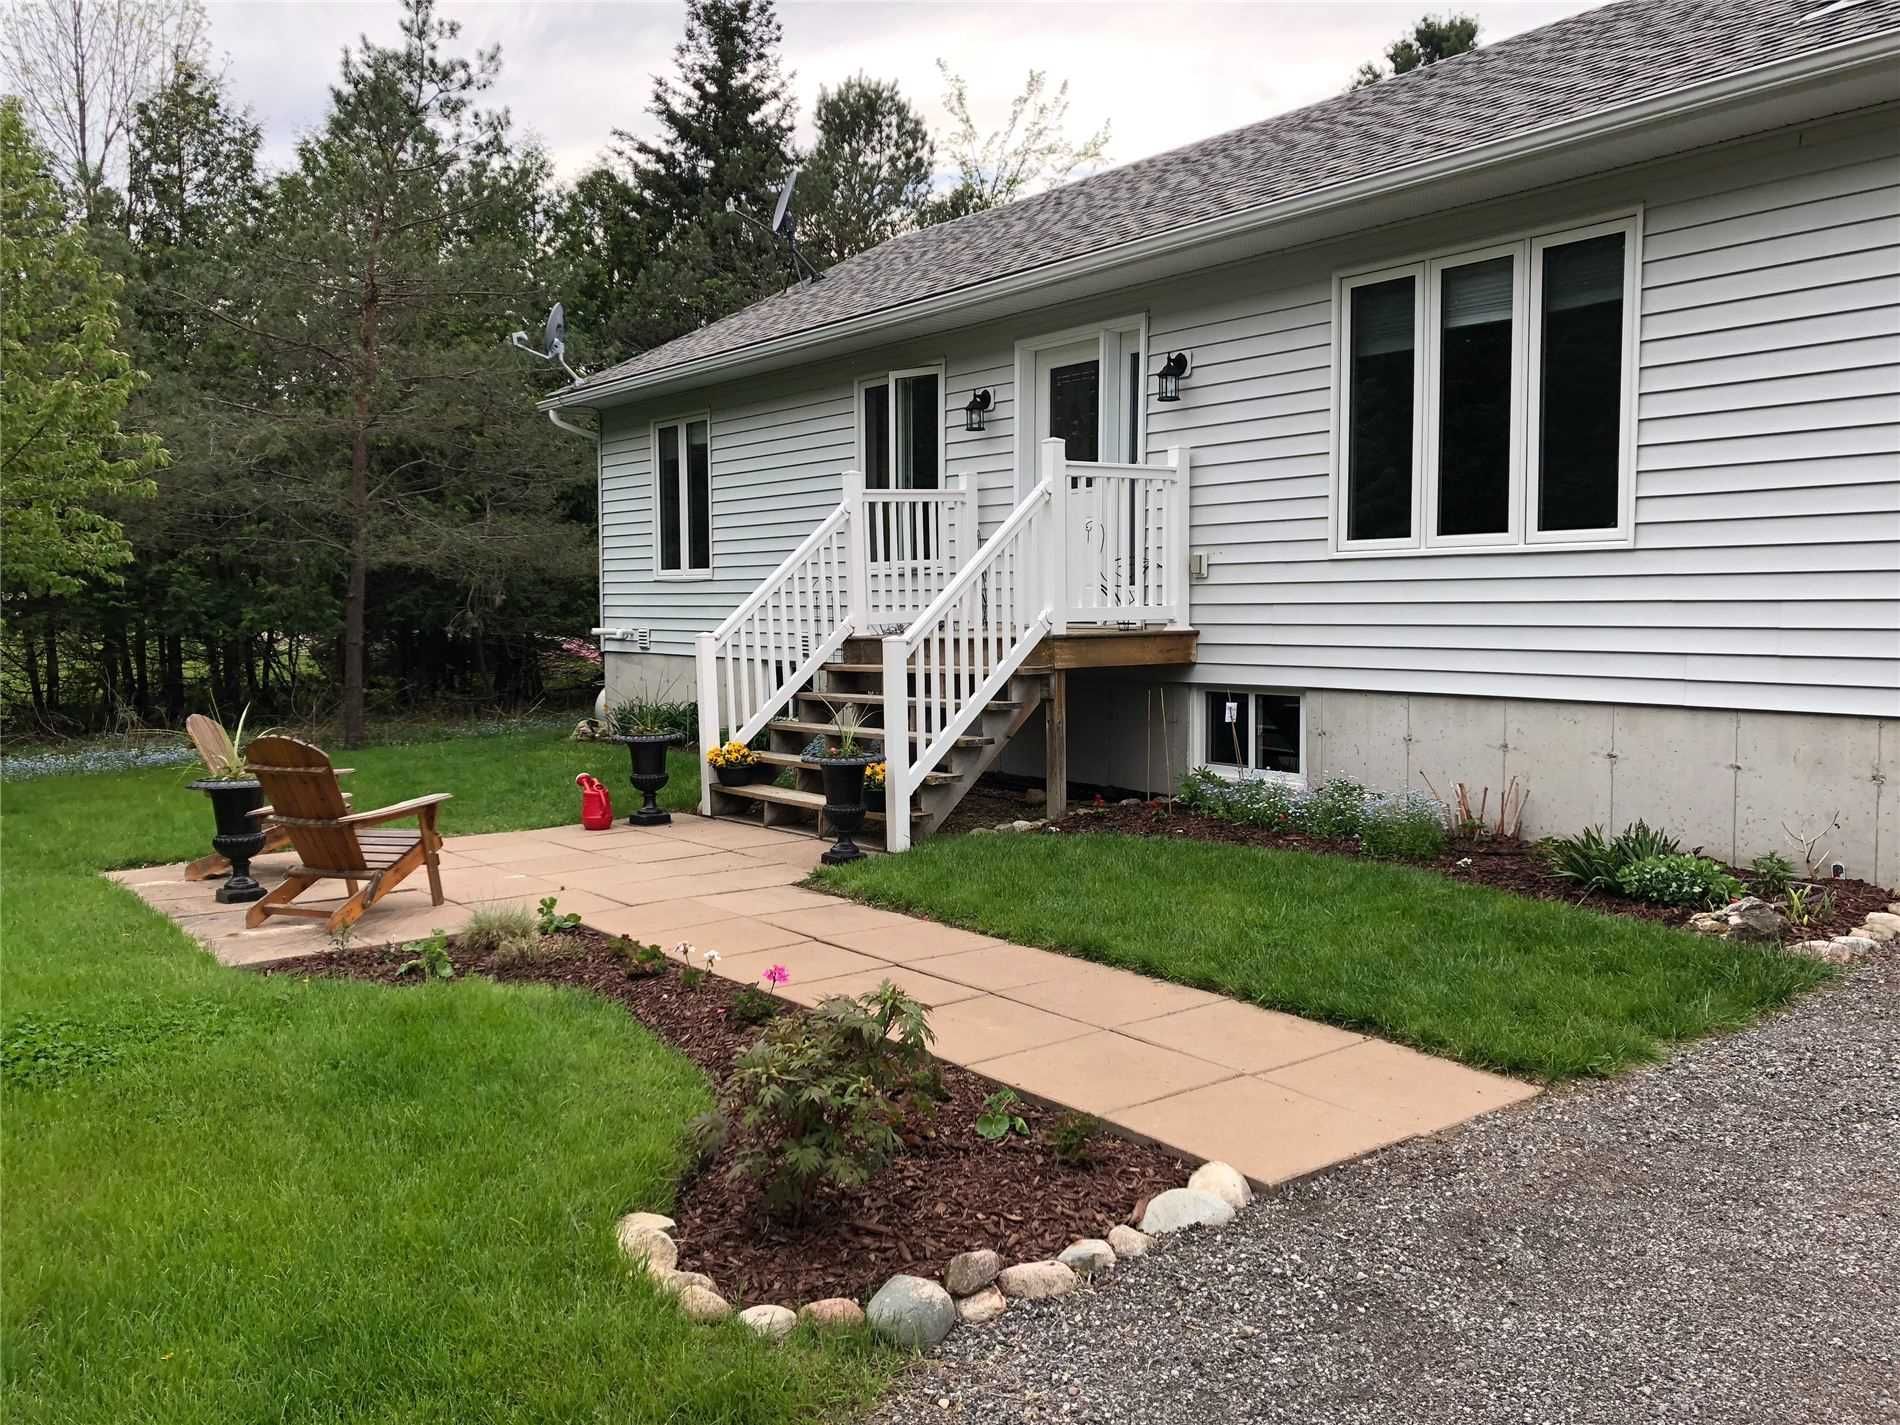 Main Photo: 9224 County Road 1 Road in Adjala-Tosorontio: Hockley House (Bungalow) for sale : MLS®# N5180525